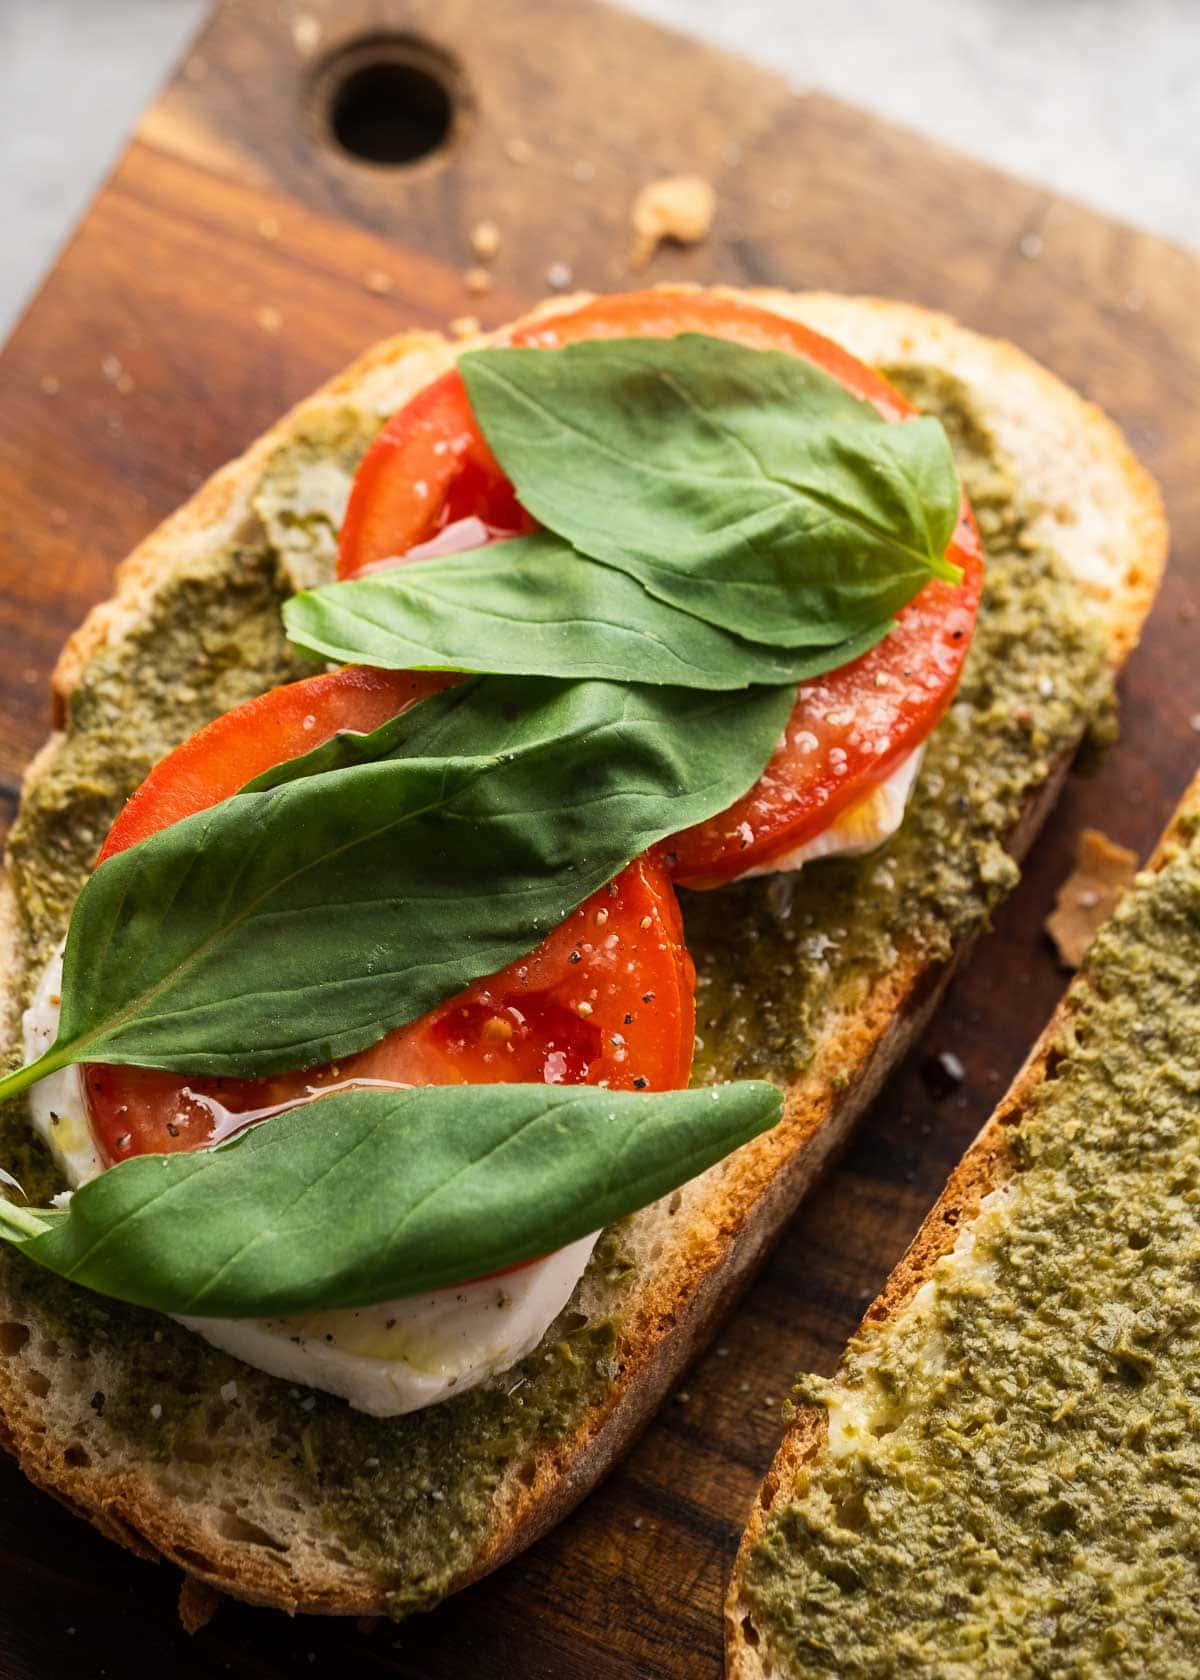 tomato and basil being added to sliced bread on wooden cutting board